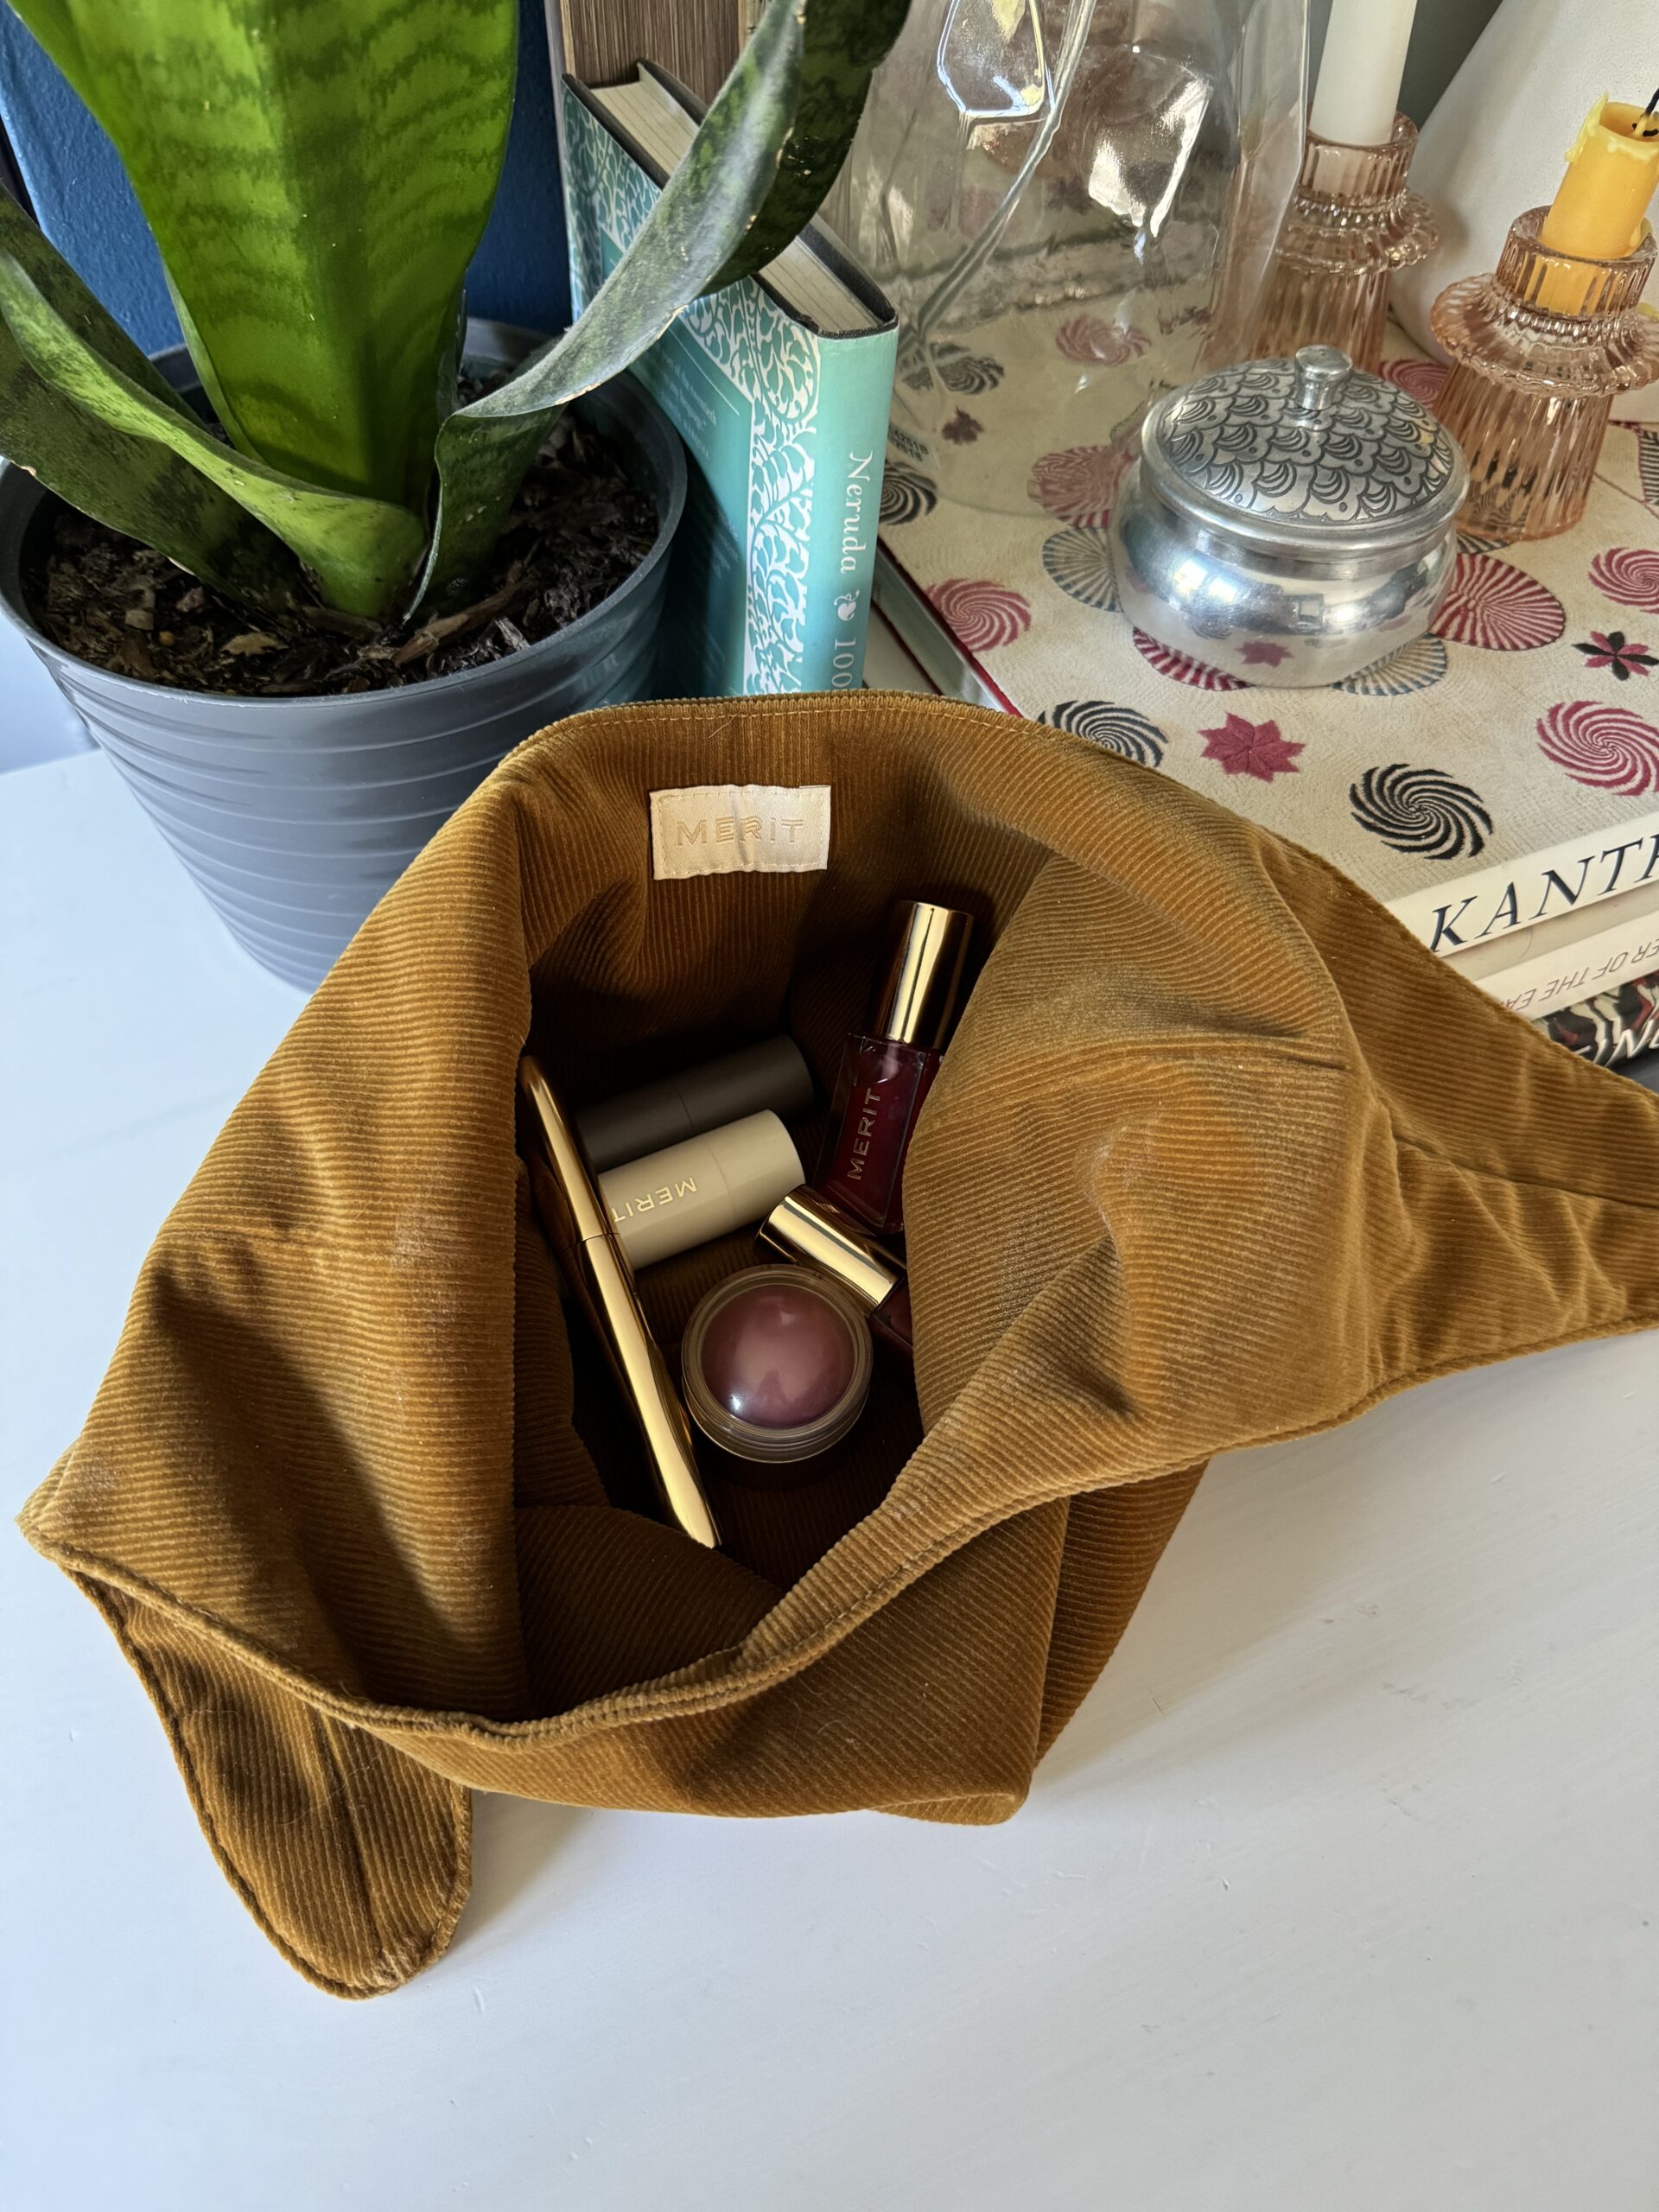 Velvet cosmetic bag with makeup products on a table next to a potted plant.